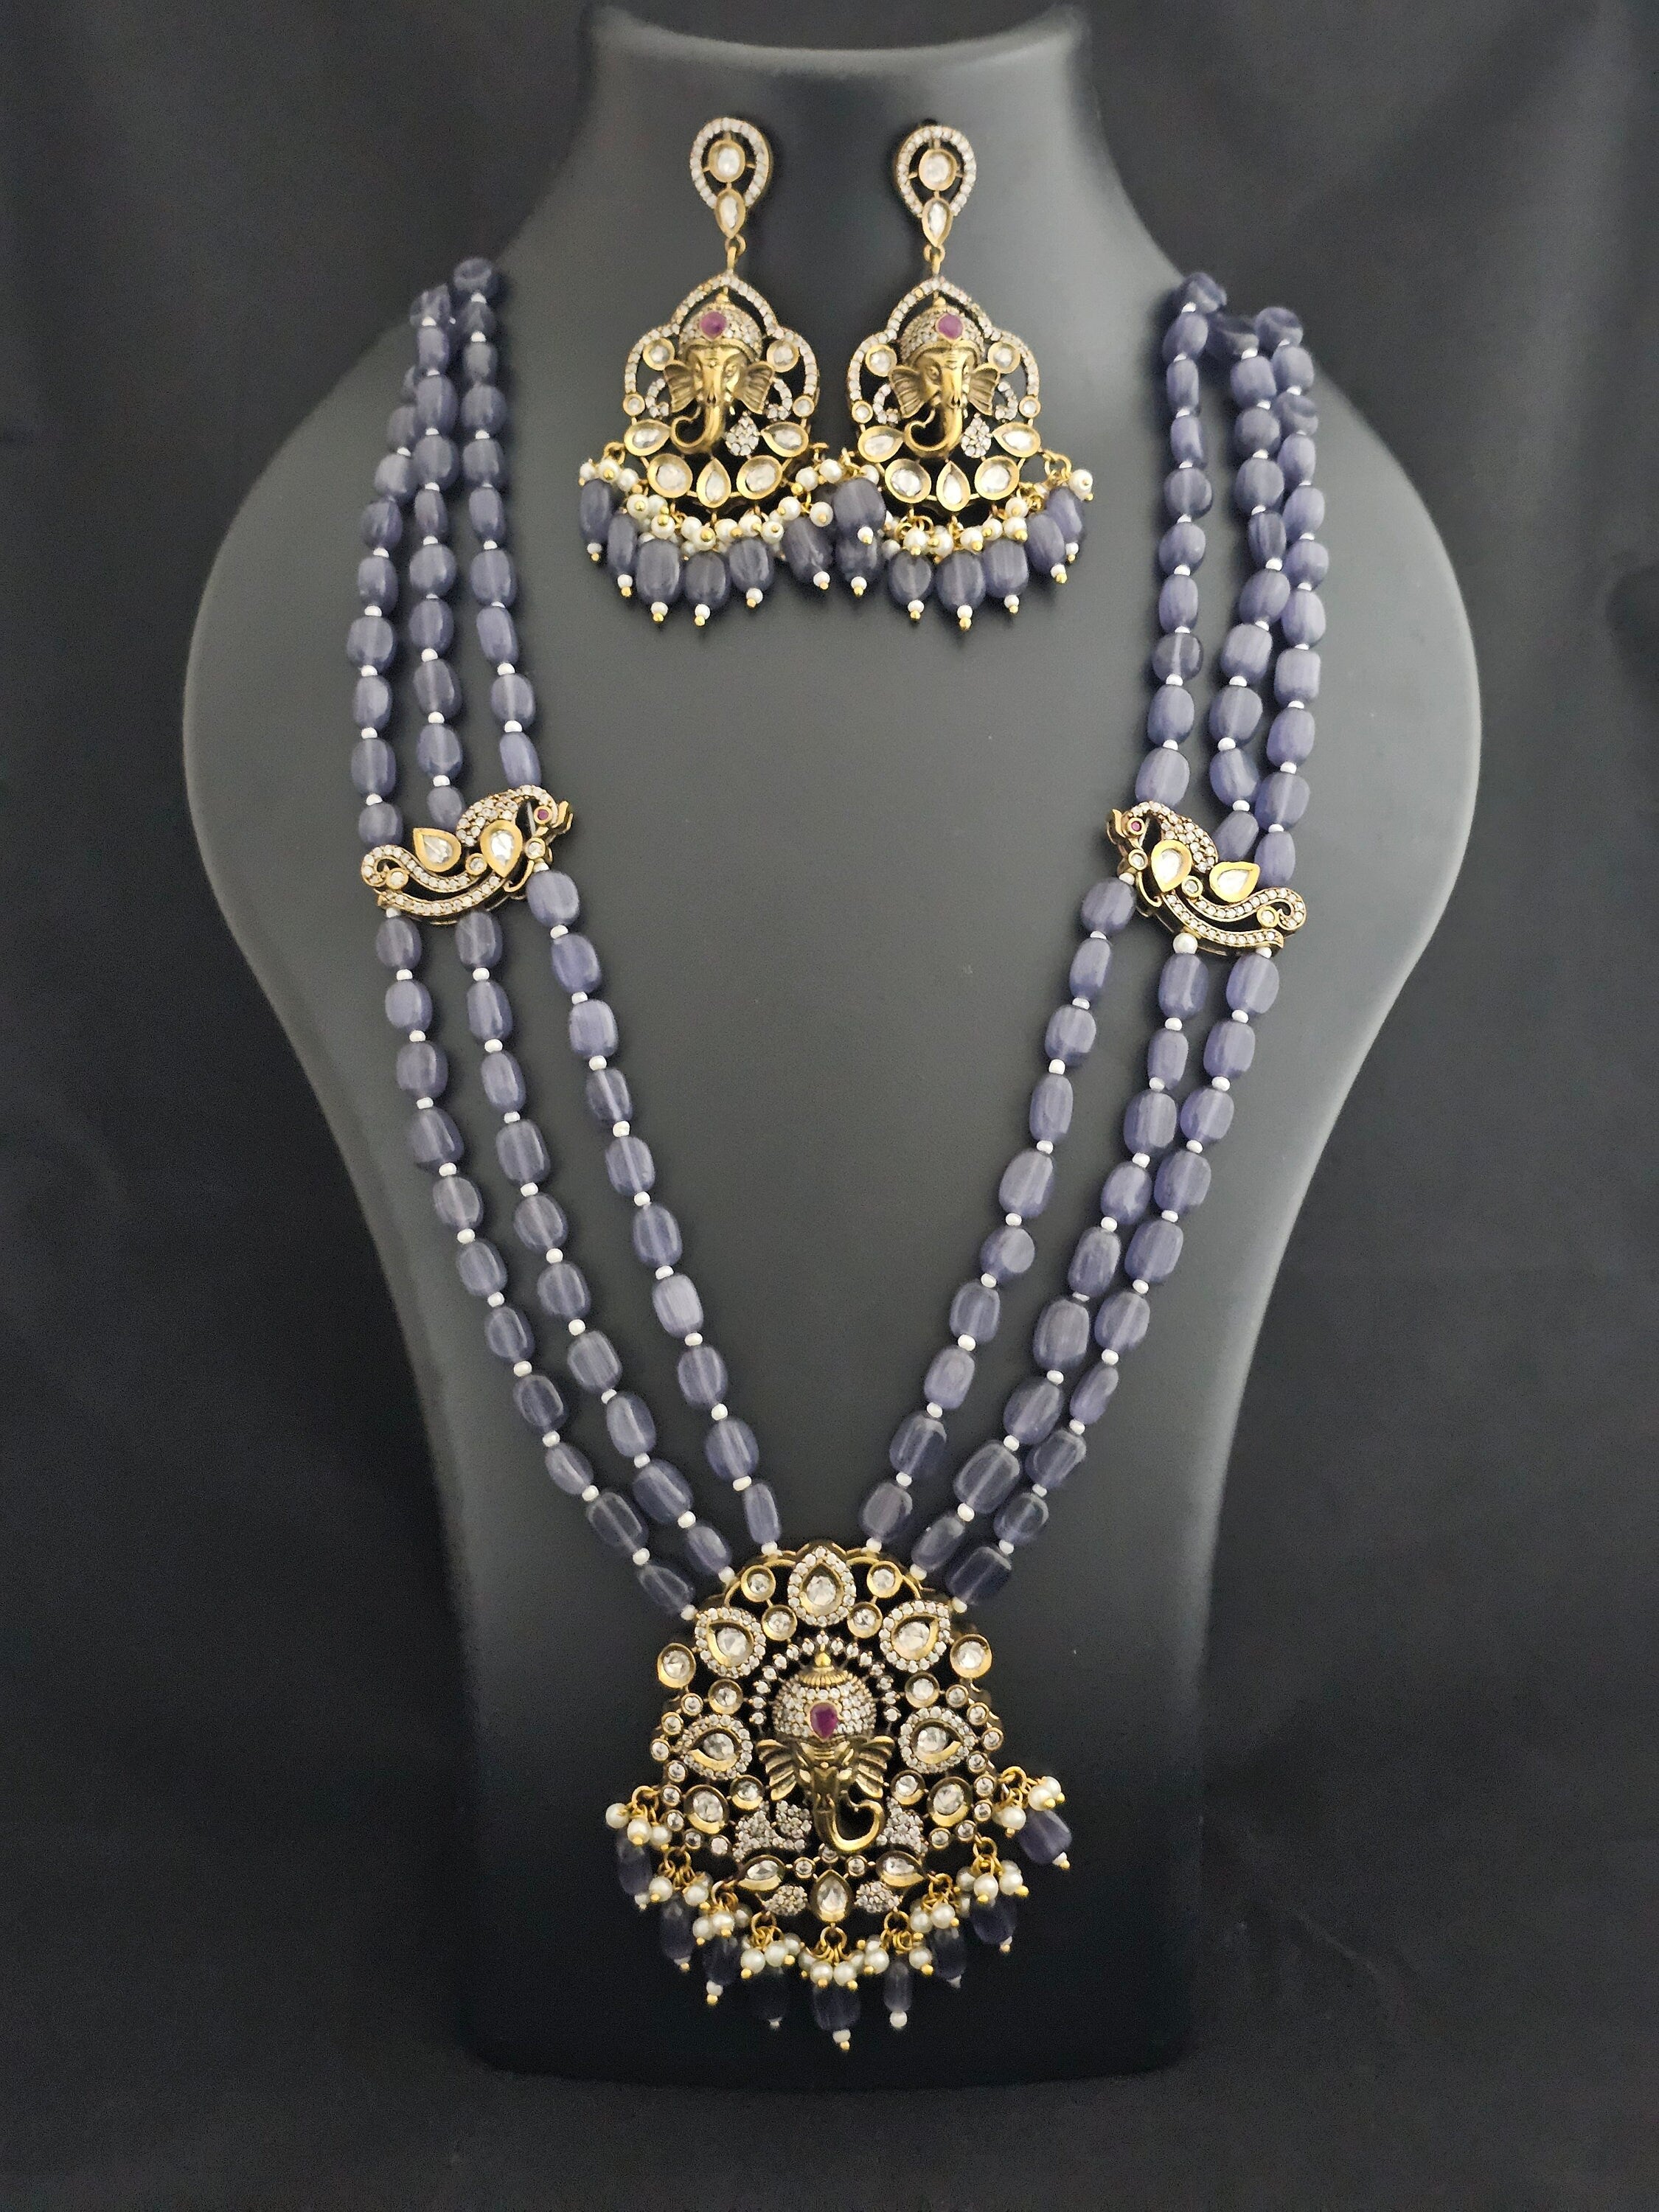 Ganesa Premium Quality Triple layer Victorian pendent with strawberry bead long mala with Beautiful Victorian Earrings